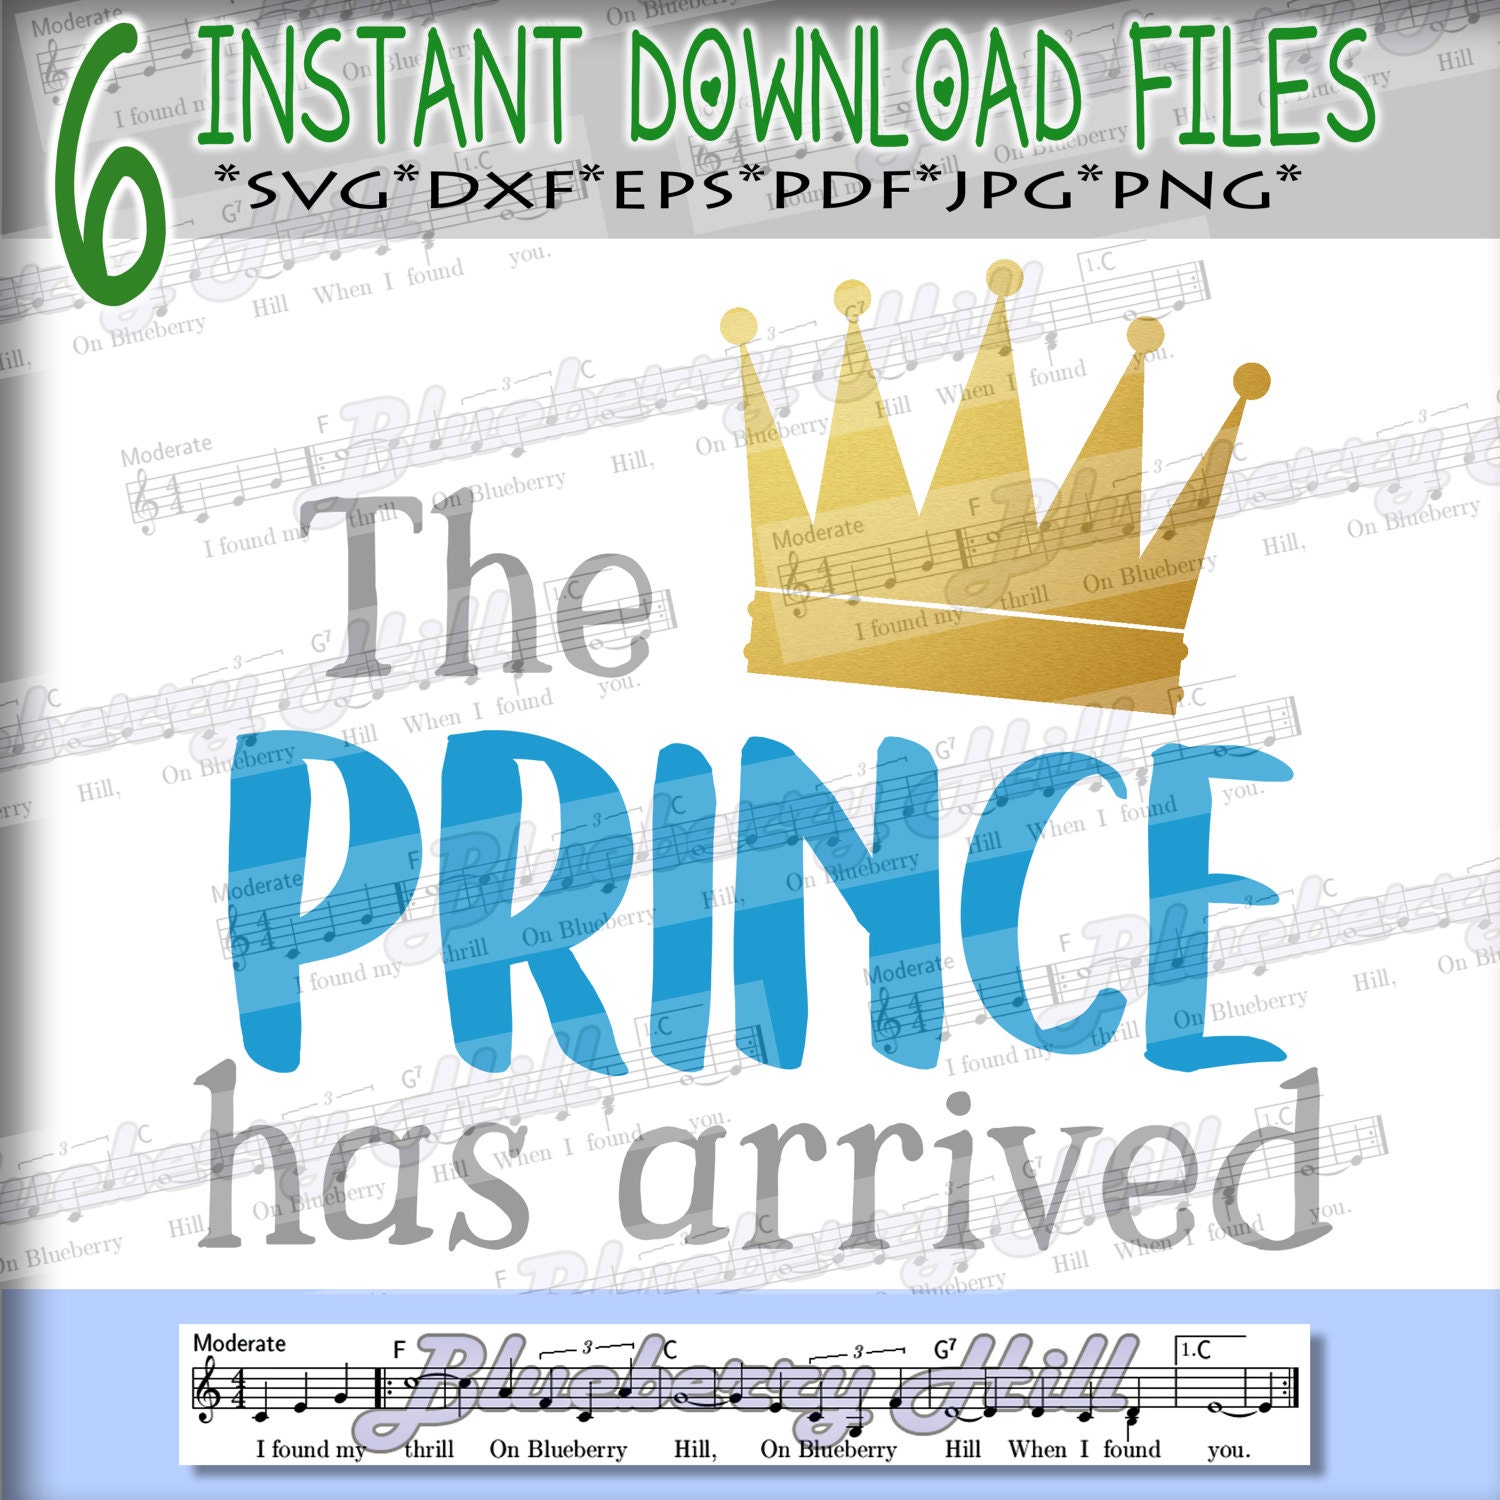 The Prince Has Arrived SVG Prince Crown SVG file Baby boy